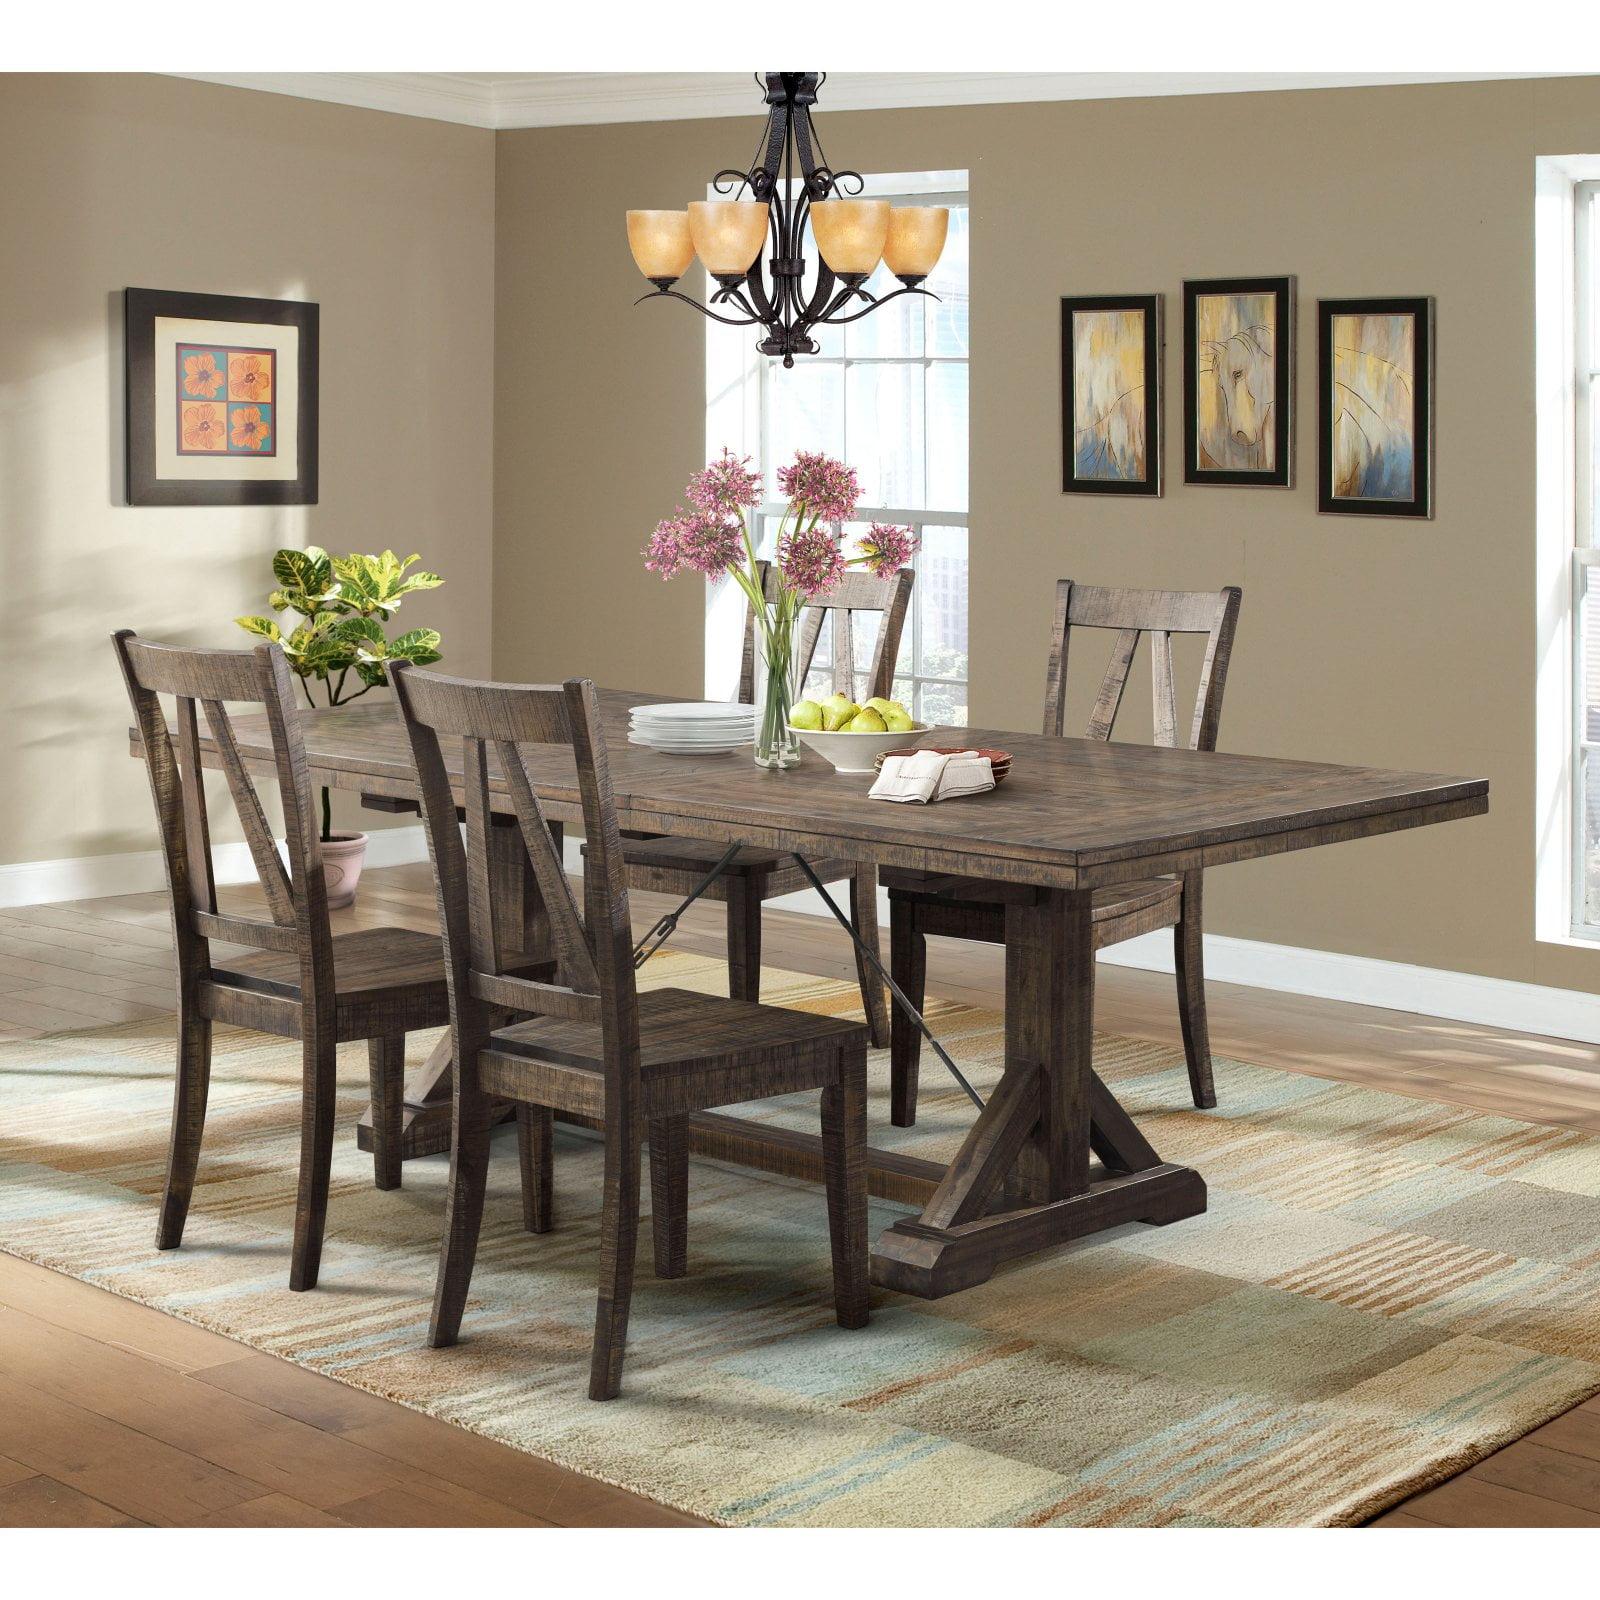 Flynn Rustic Chic Walnut Dining Set with Trestle Table & 4 Chairs